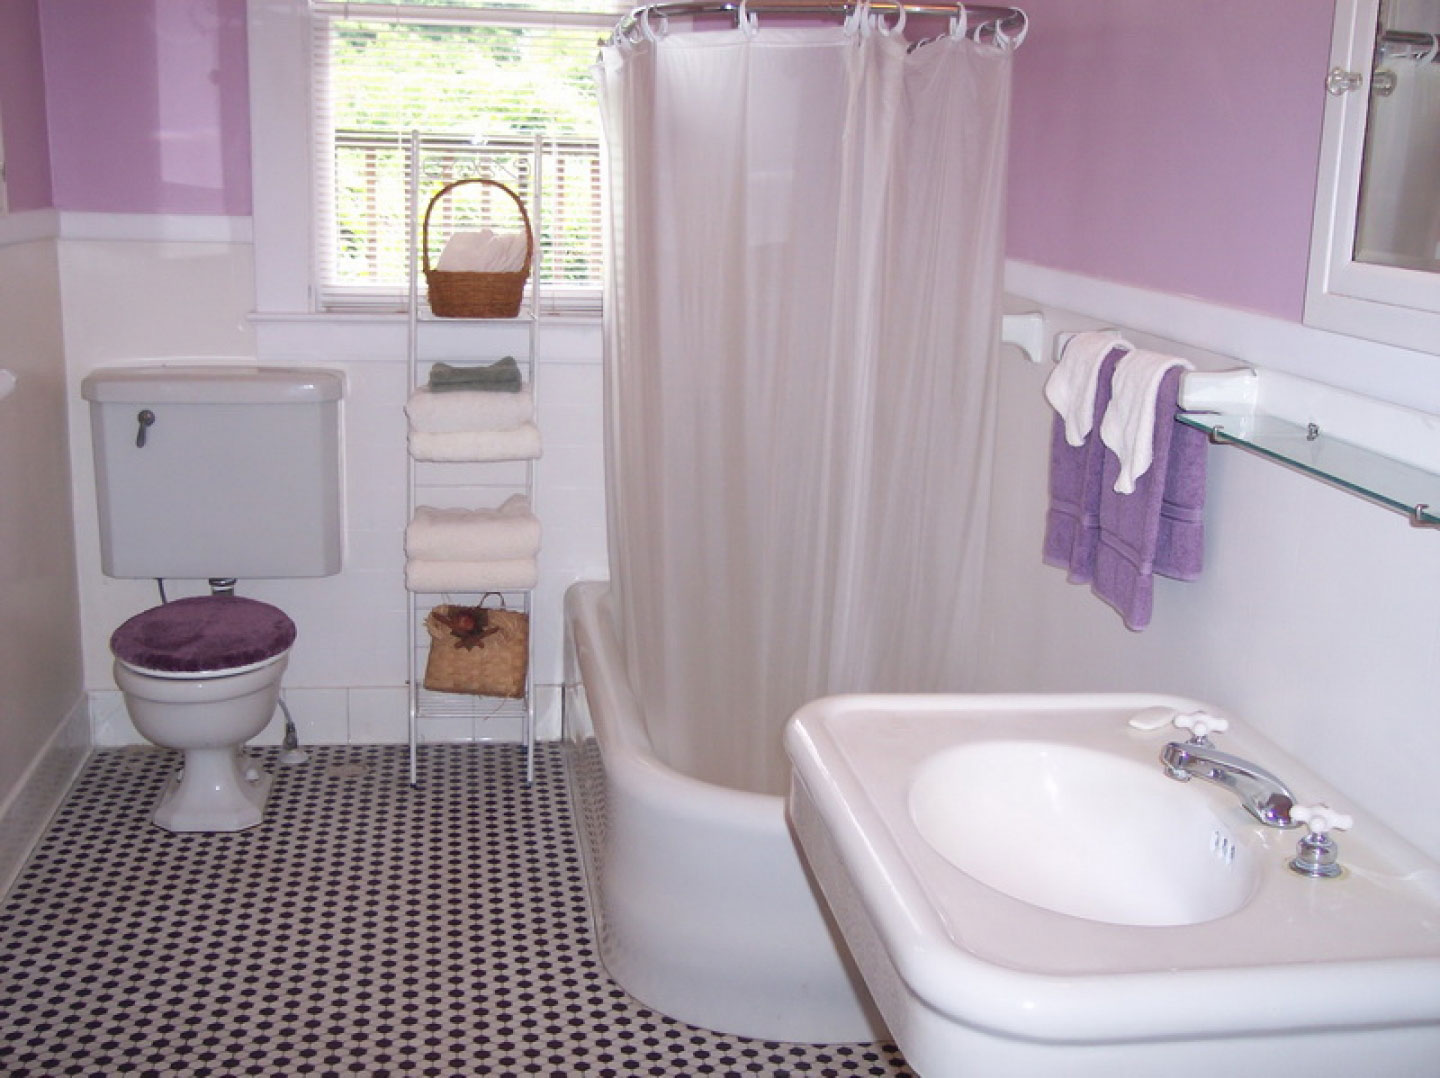 Bathroom Applying Light Charming Bathroom Applying White And Light Purple Color Ideas Installed With Toilet Seat Also Sink And Bathtub And Furnished With Bathroom Storage Ideas Bathroom Bathroom Storage Ideas For Your Comfortable Bathroom